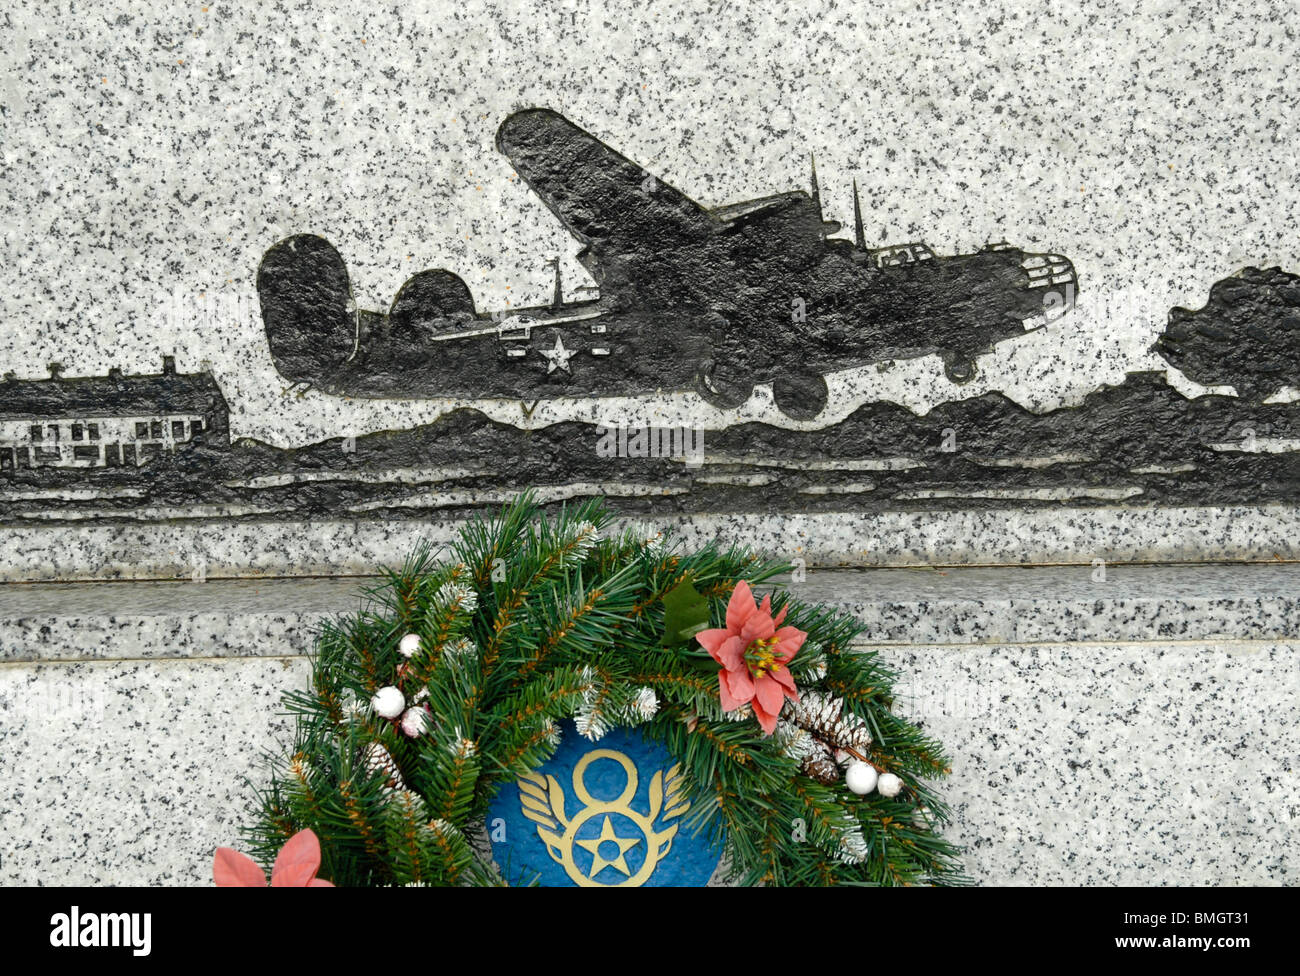 Wreath and memorial stone to the US 8th Air Force at Harrington Airfield, Northamptonshire, UK, 2008. Stock Photo